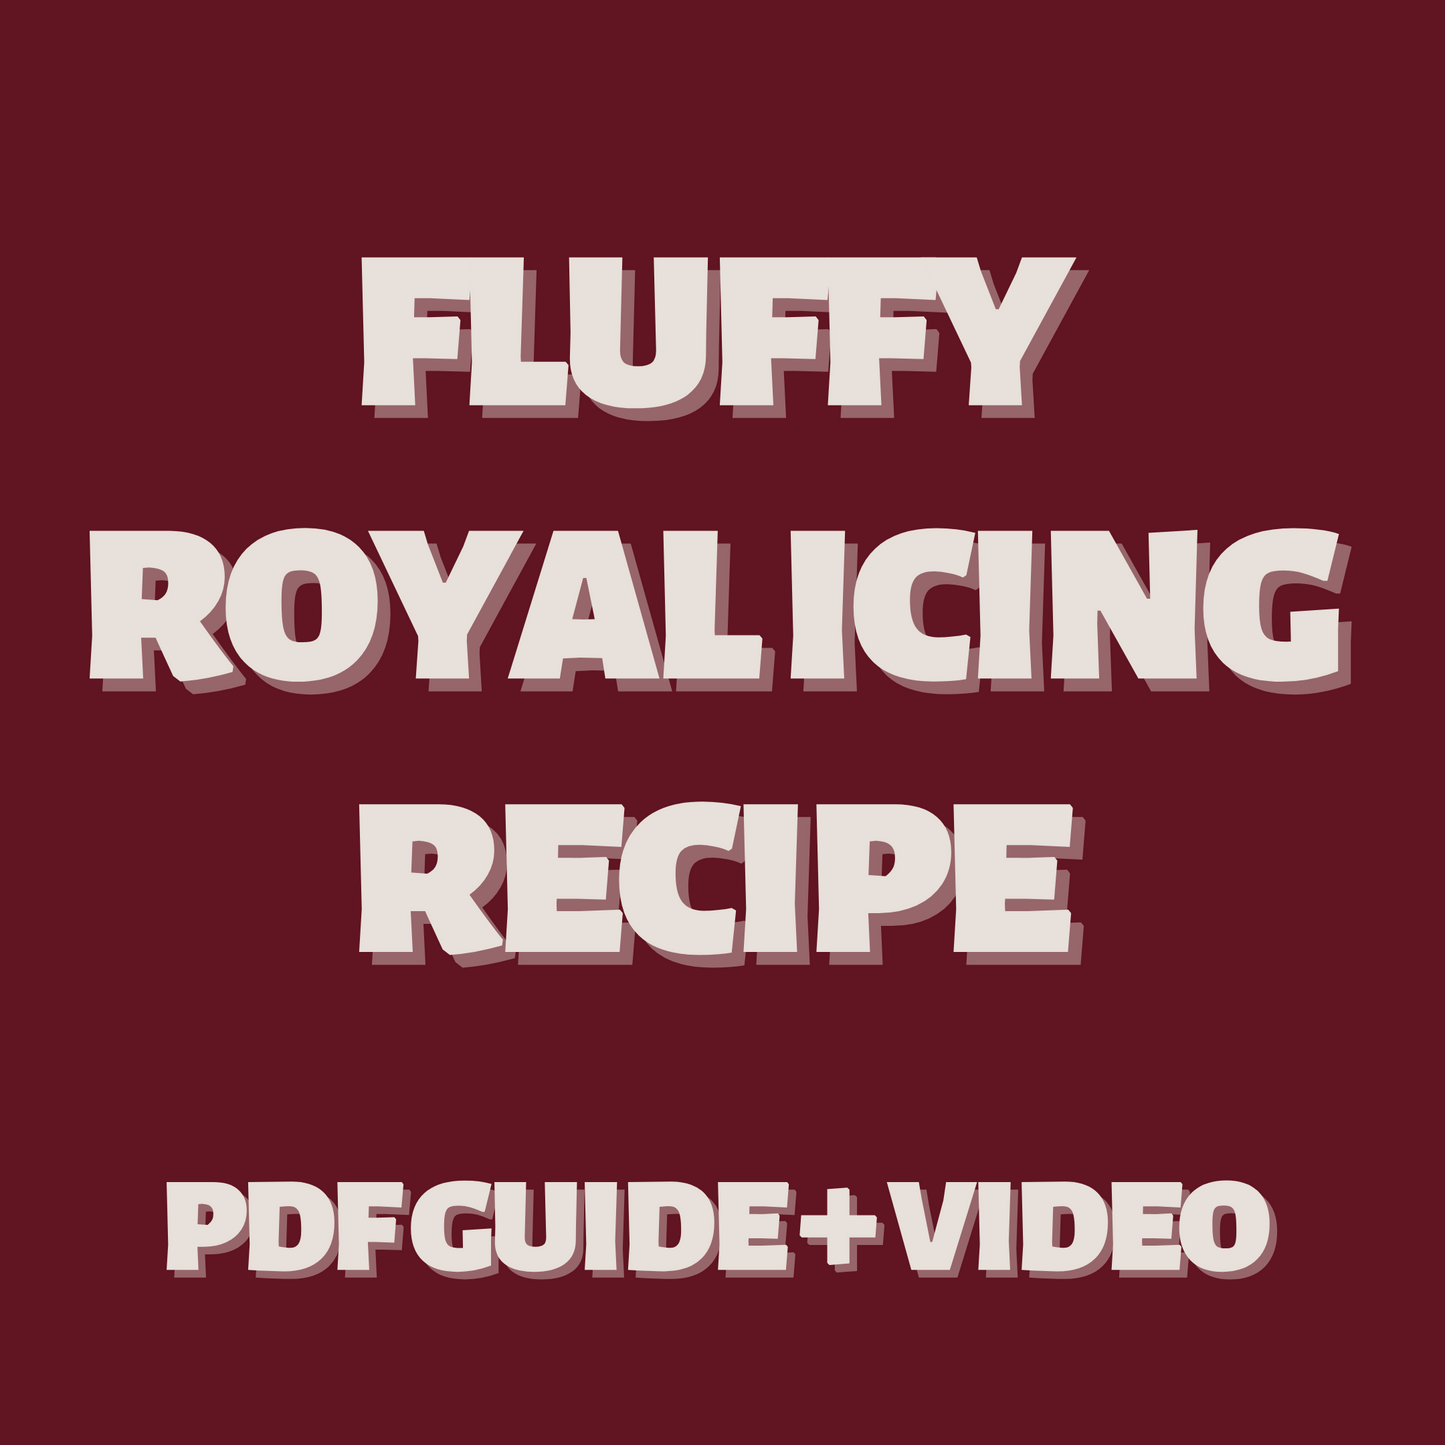 Fluffy Royal Icing Recipe (PDF Guide with Instructional Video)